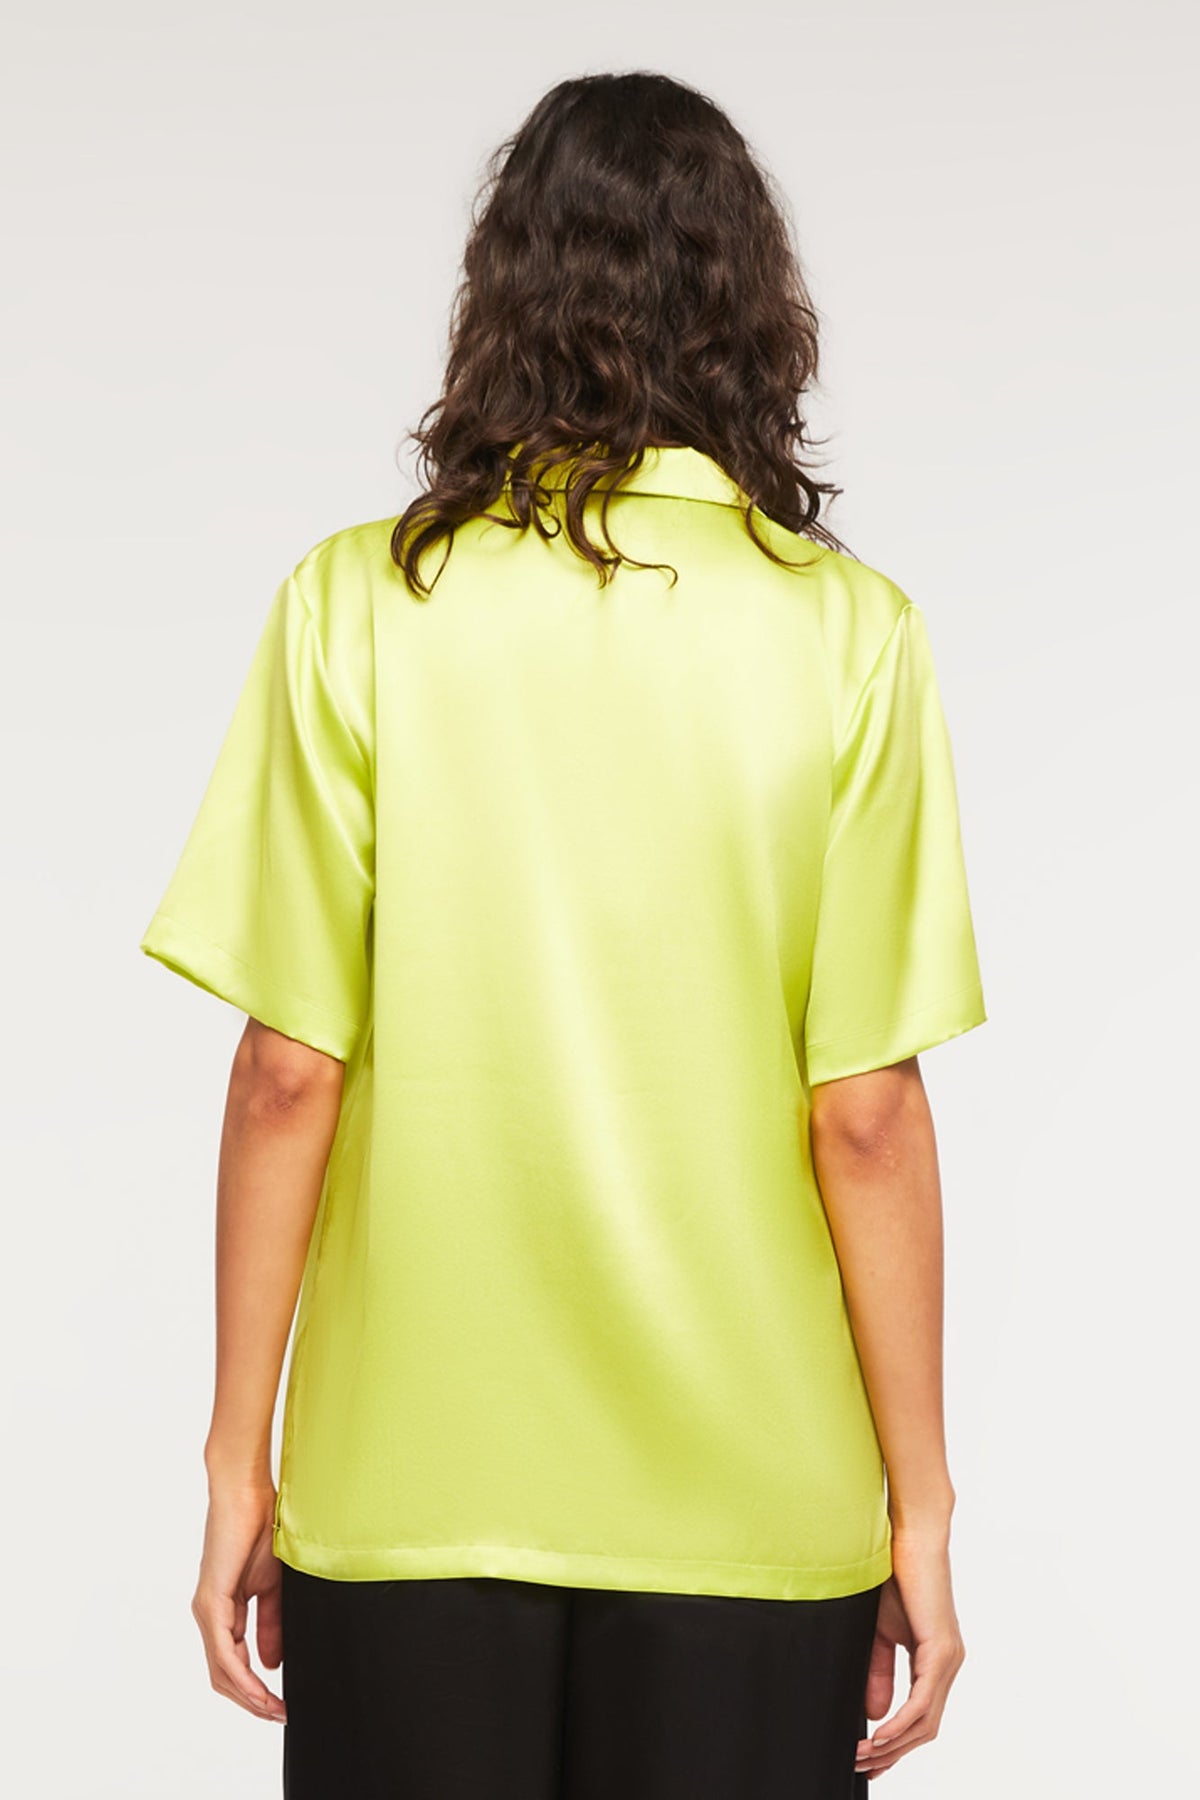 Camp Shirt in Electric Lime from GINIA RTW